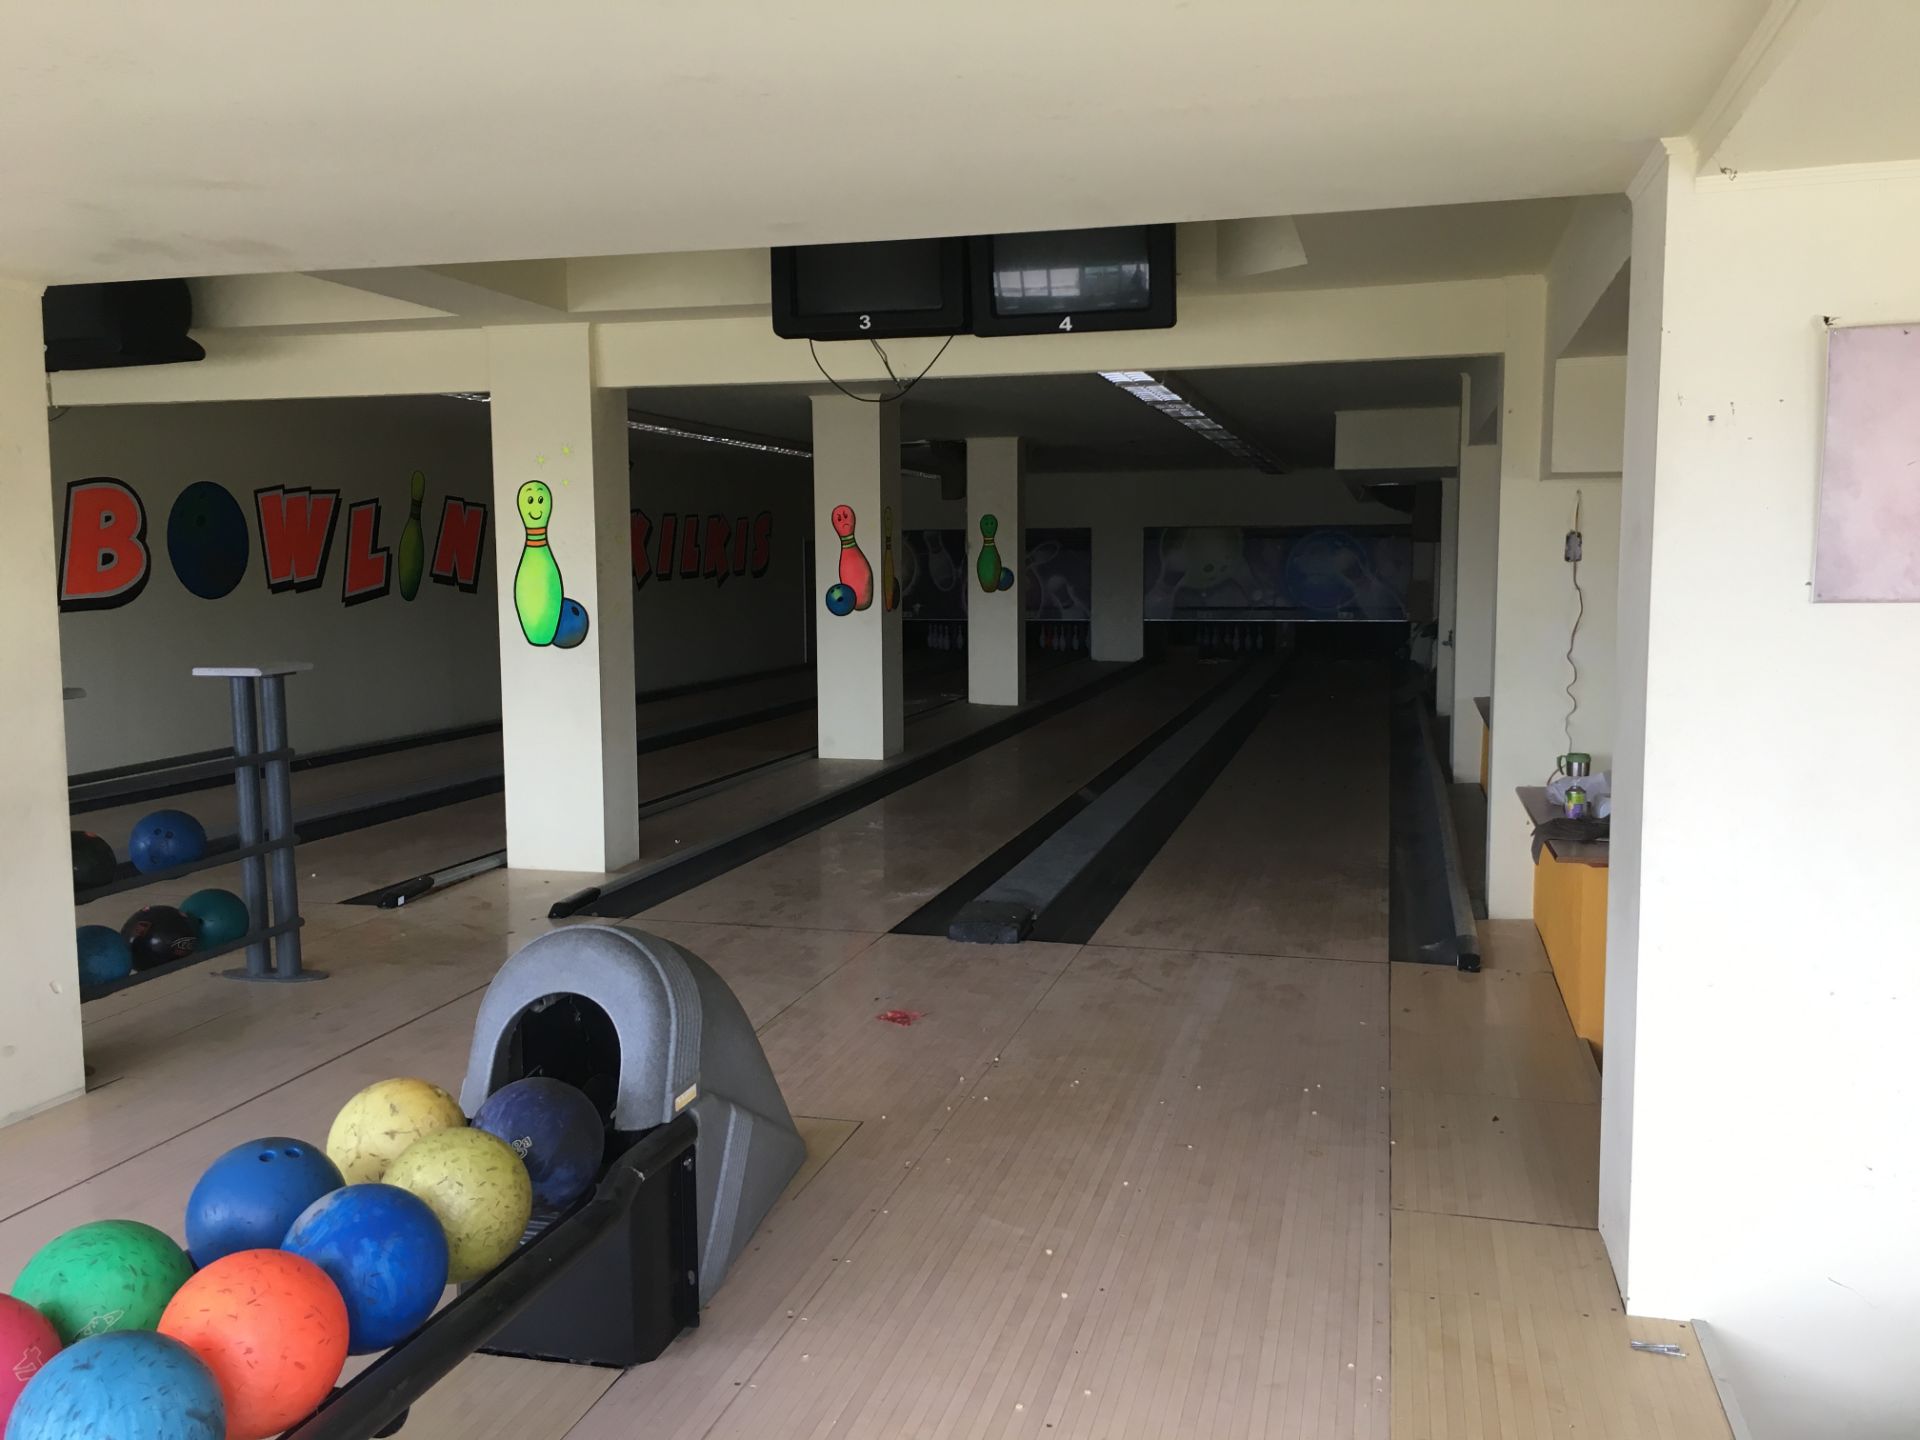 Complete Bowling Facility 4 Lanes Brunswick ( Building Not for Sale) - Image 11 of 86